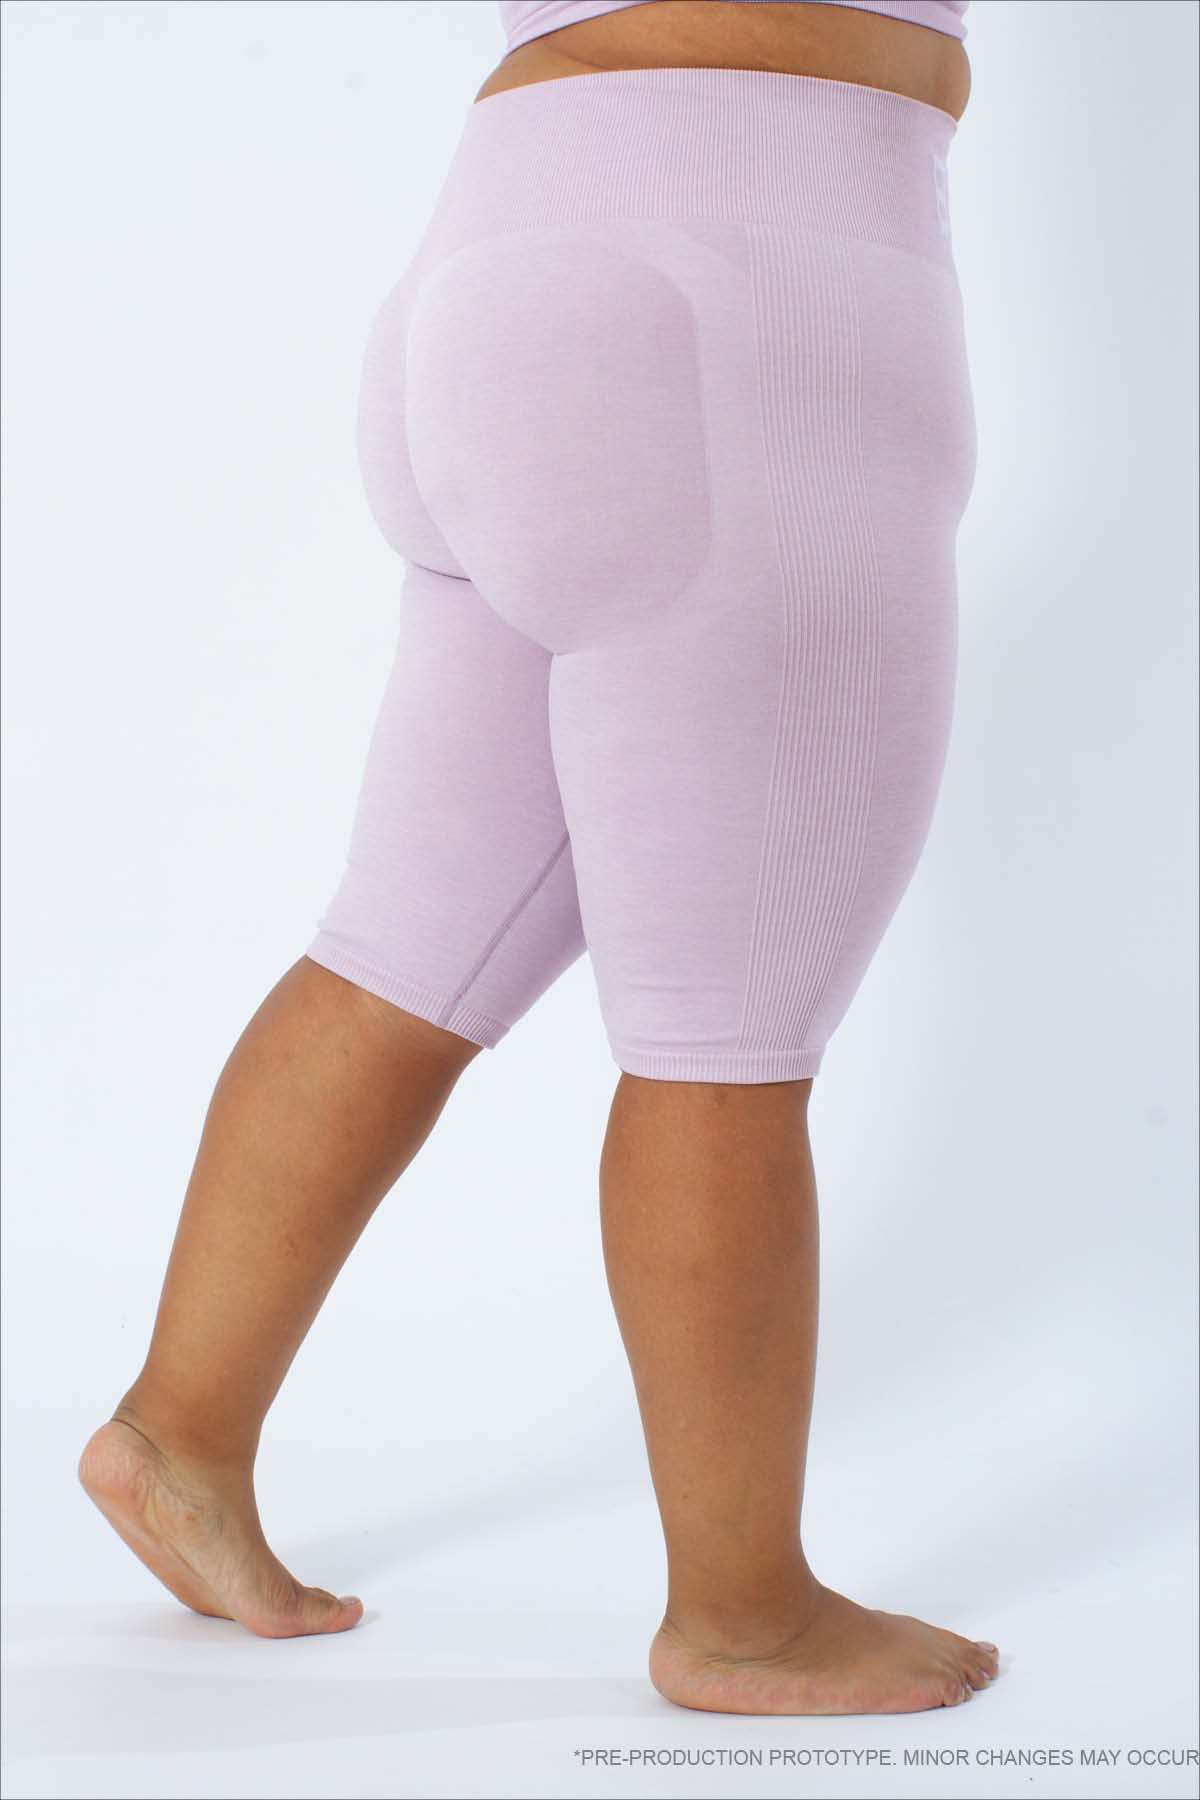 BODY SHAPING KNEE LENGTH COMPRESSION SHORT